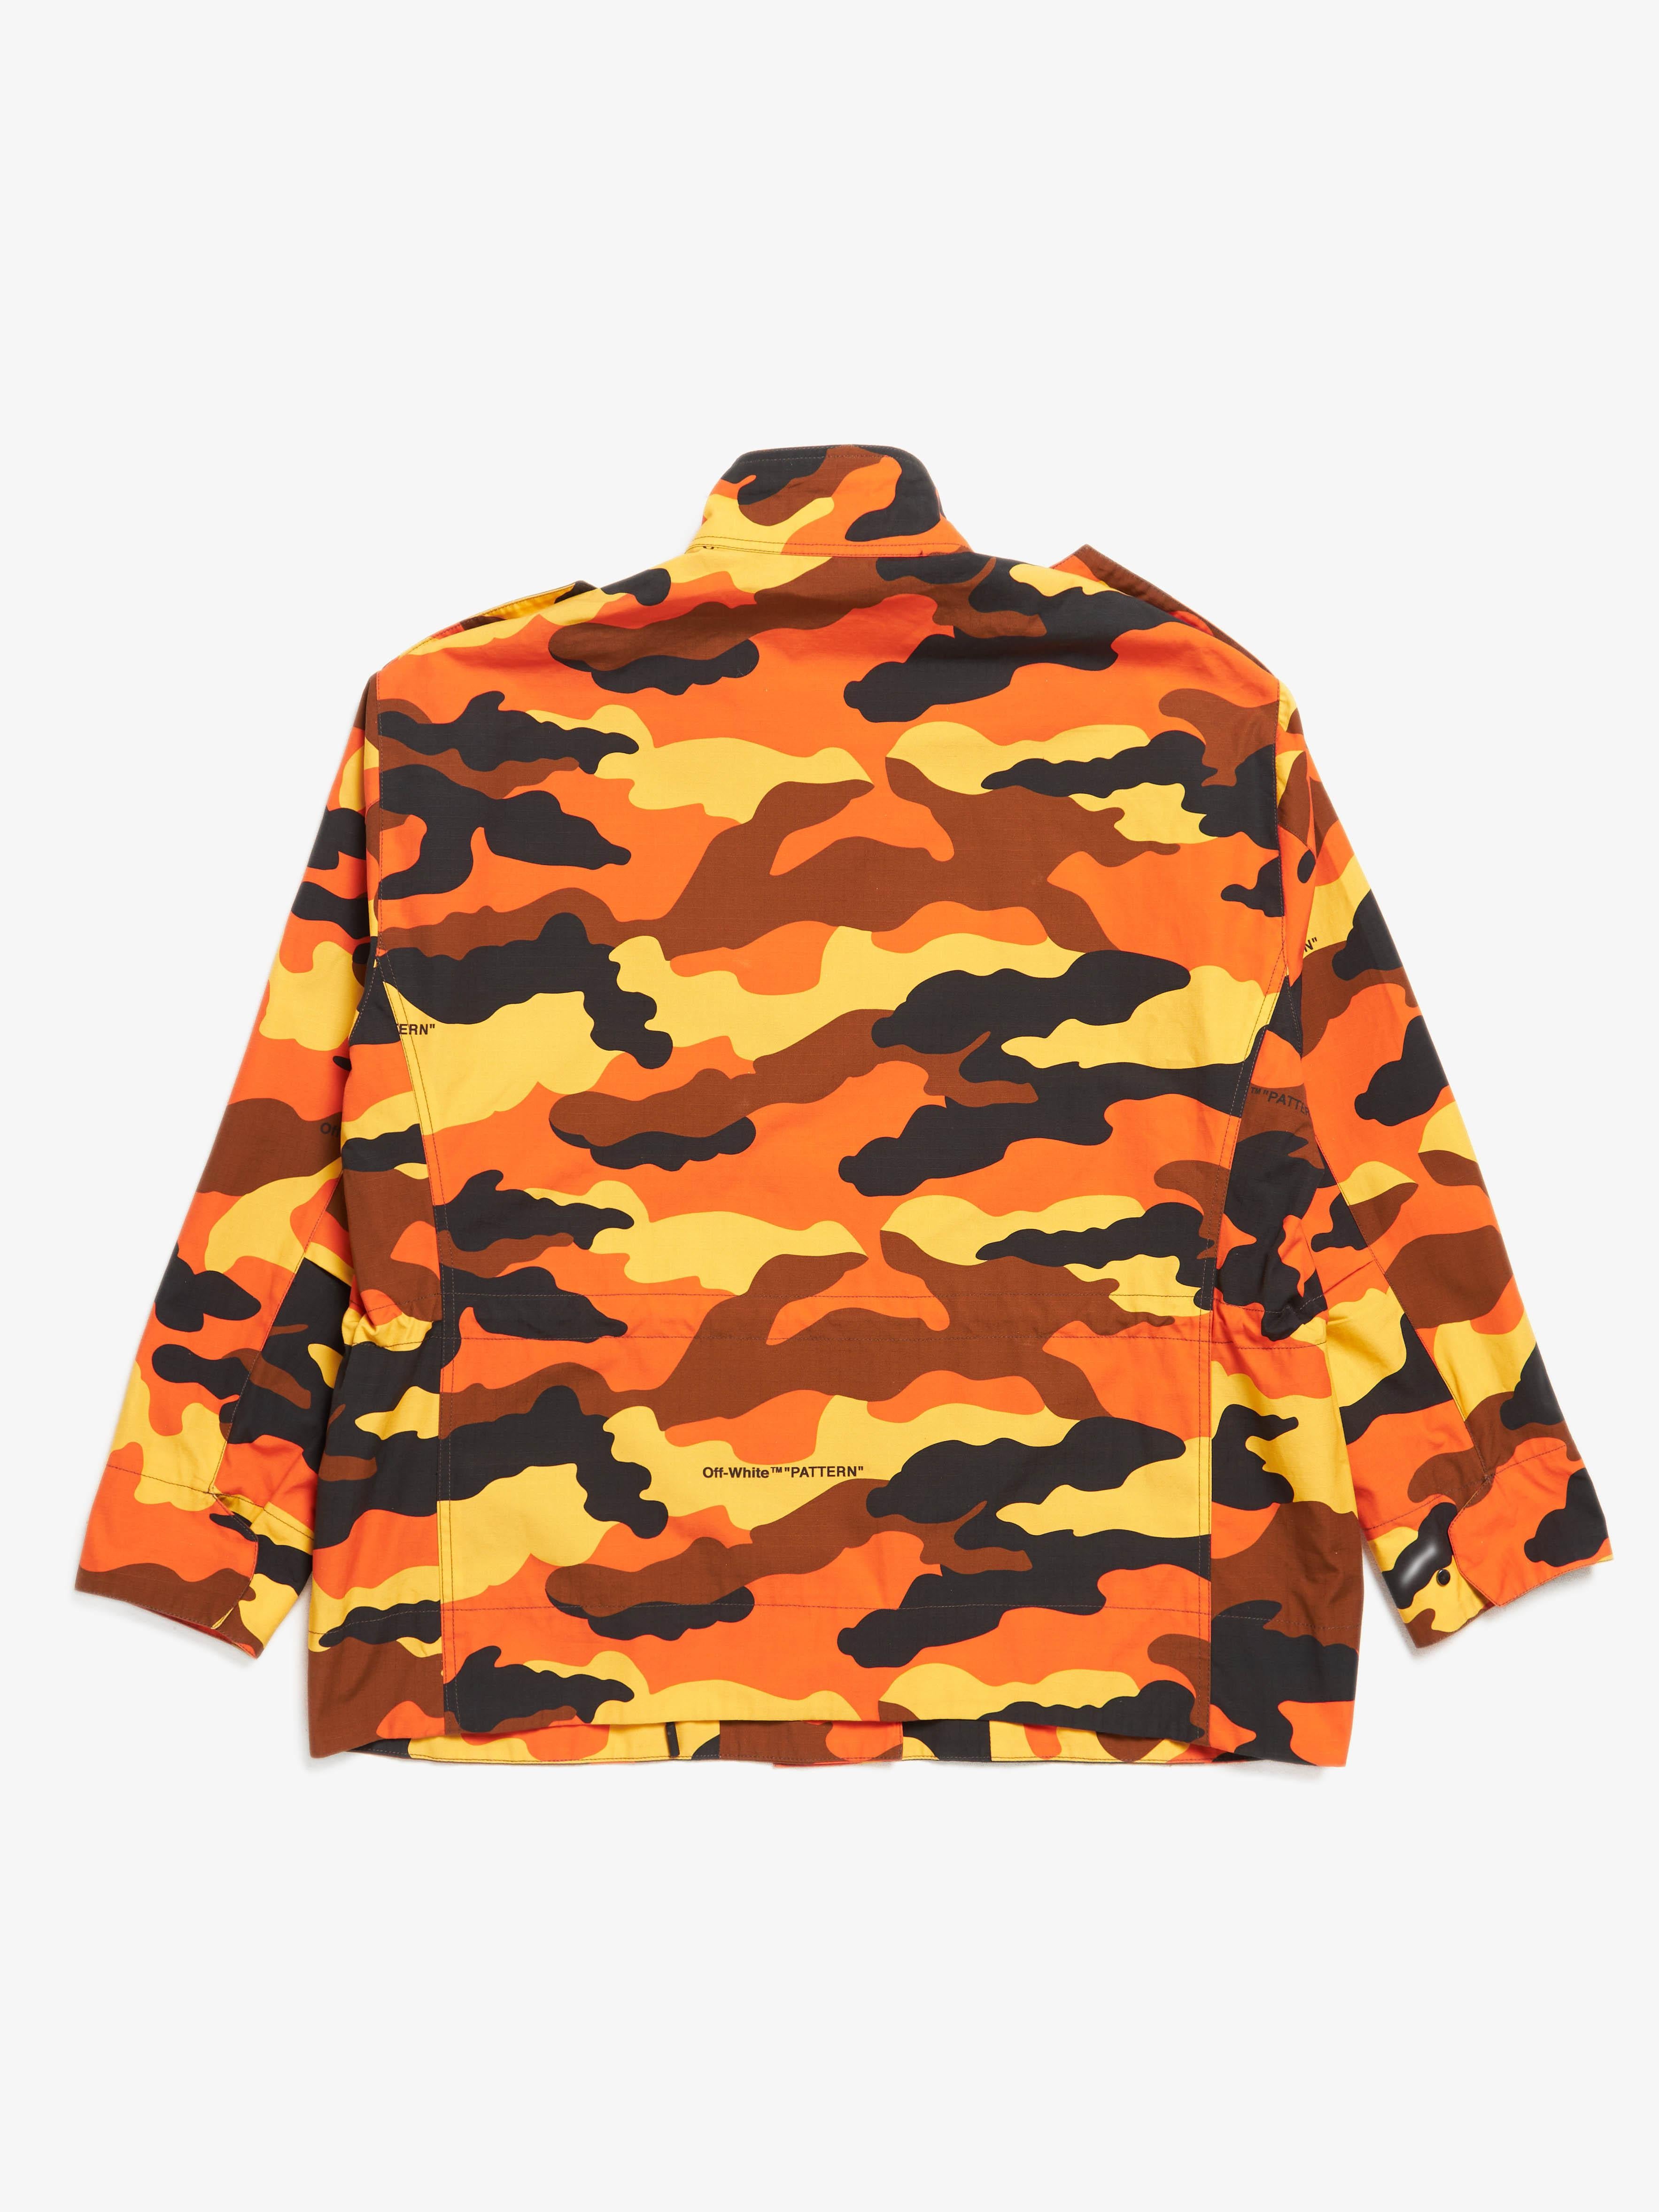 Off-White  Camo Oversized Field Jacket
Size marked: 42
Condition: Gently used
Measurements: Shoulder to shoulder (cm) 59/ pit to pit (cm) 70/ Length (cm) 78/ sleeve (cm) 60/ 
(152400)